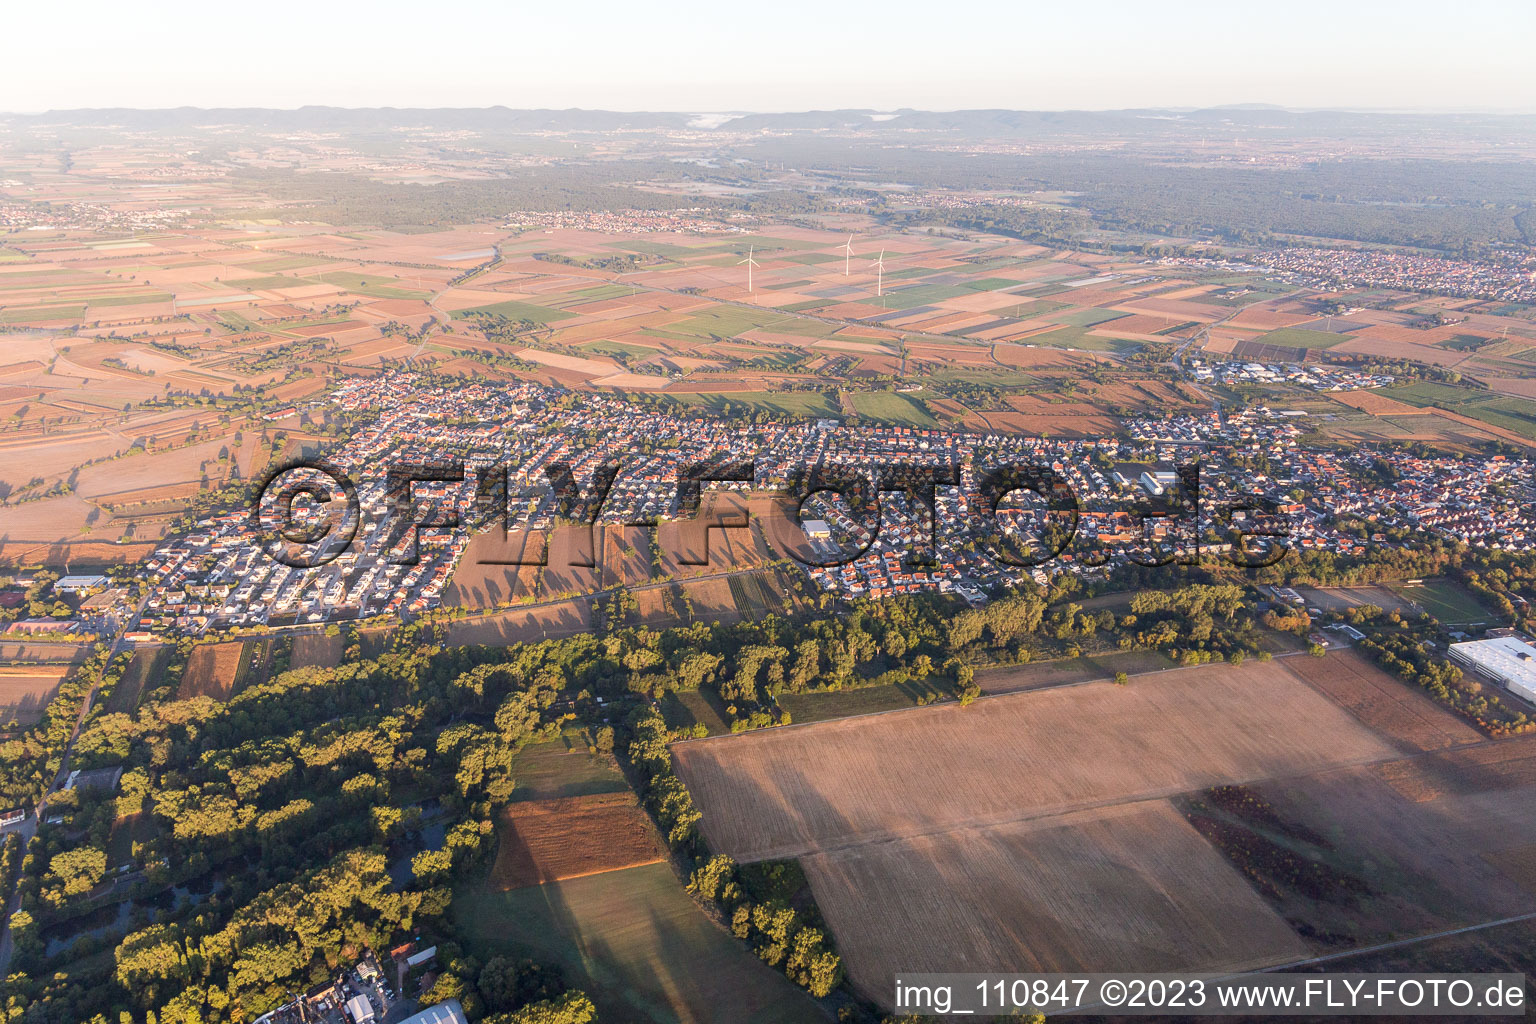 Drone image of District Berghausen in Römerberg in the state Rhineland-Palatinate, Germany